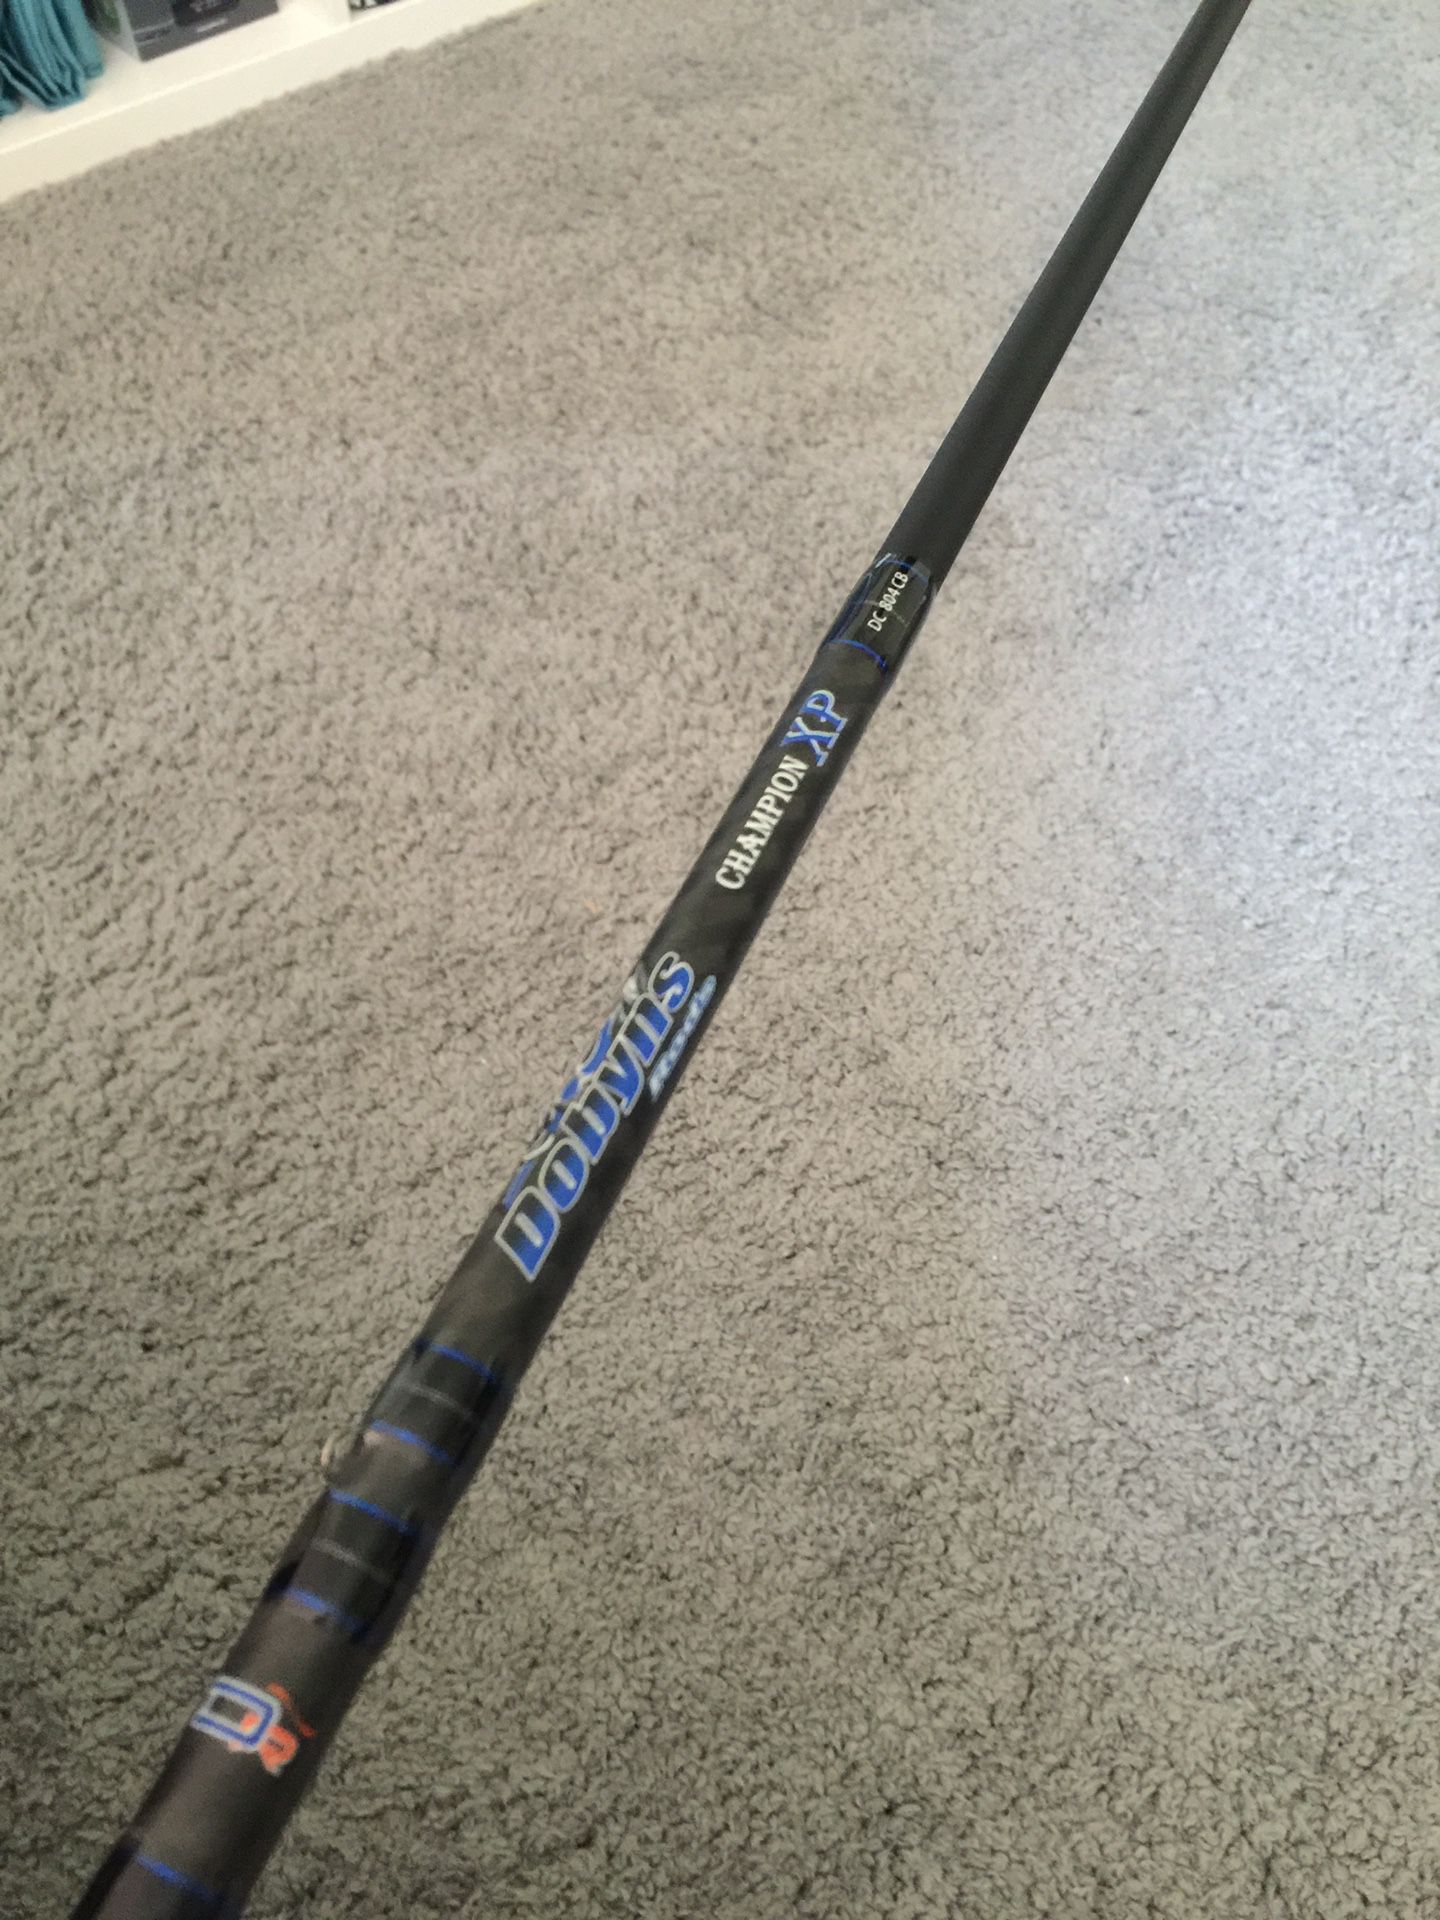 Dobyns Champion XP DC 804 CB casting fishing rod for Sale in